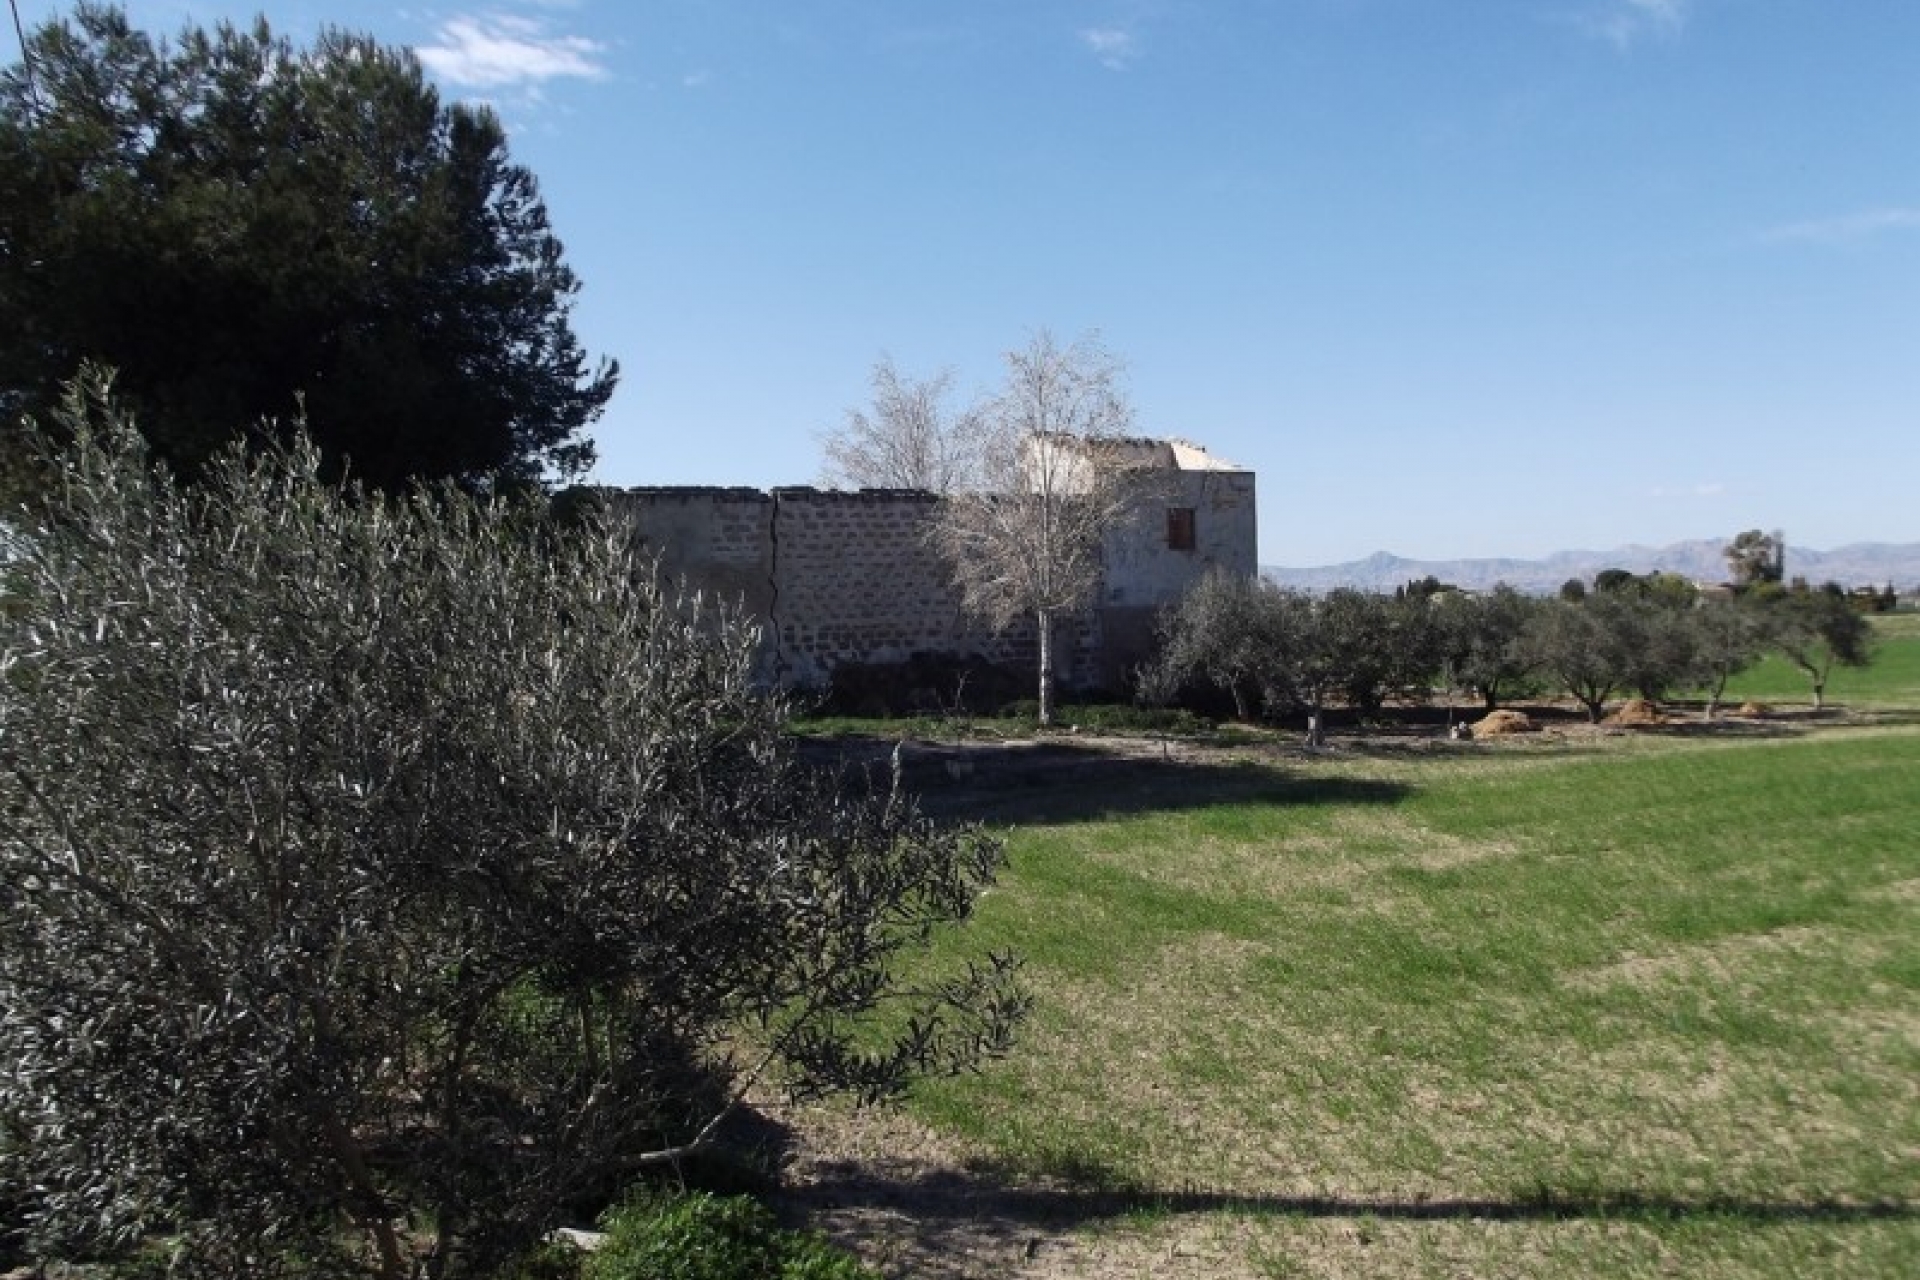 Dolores cheap bargain property for sale Costa Blanca